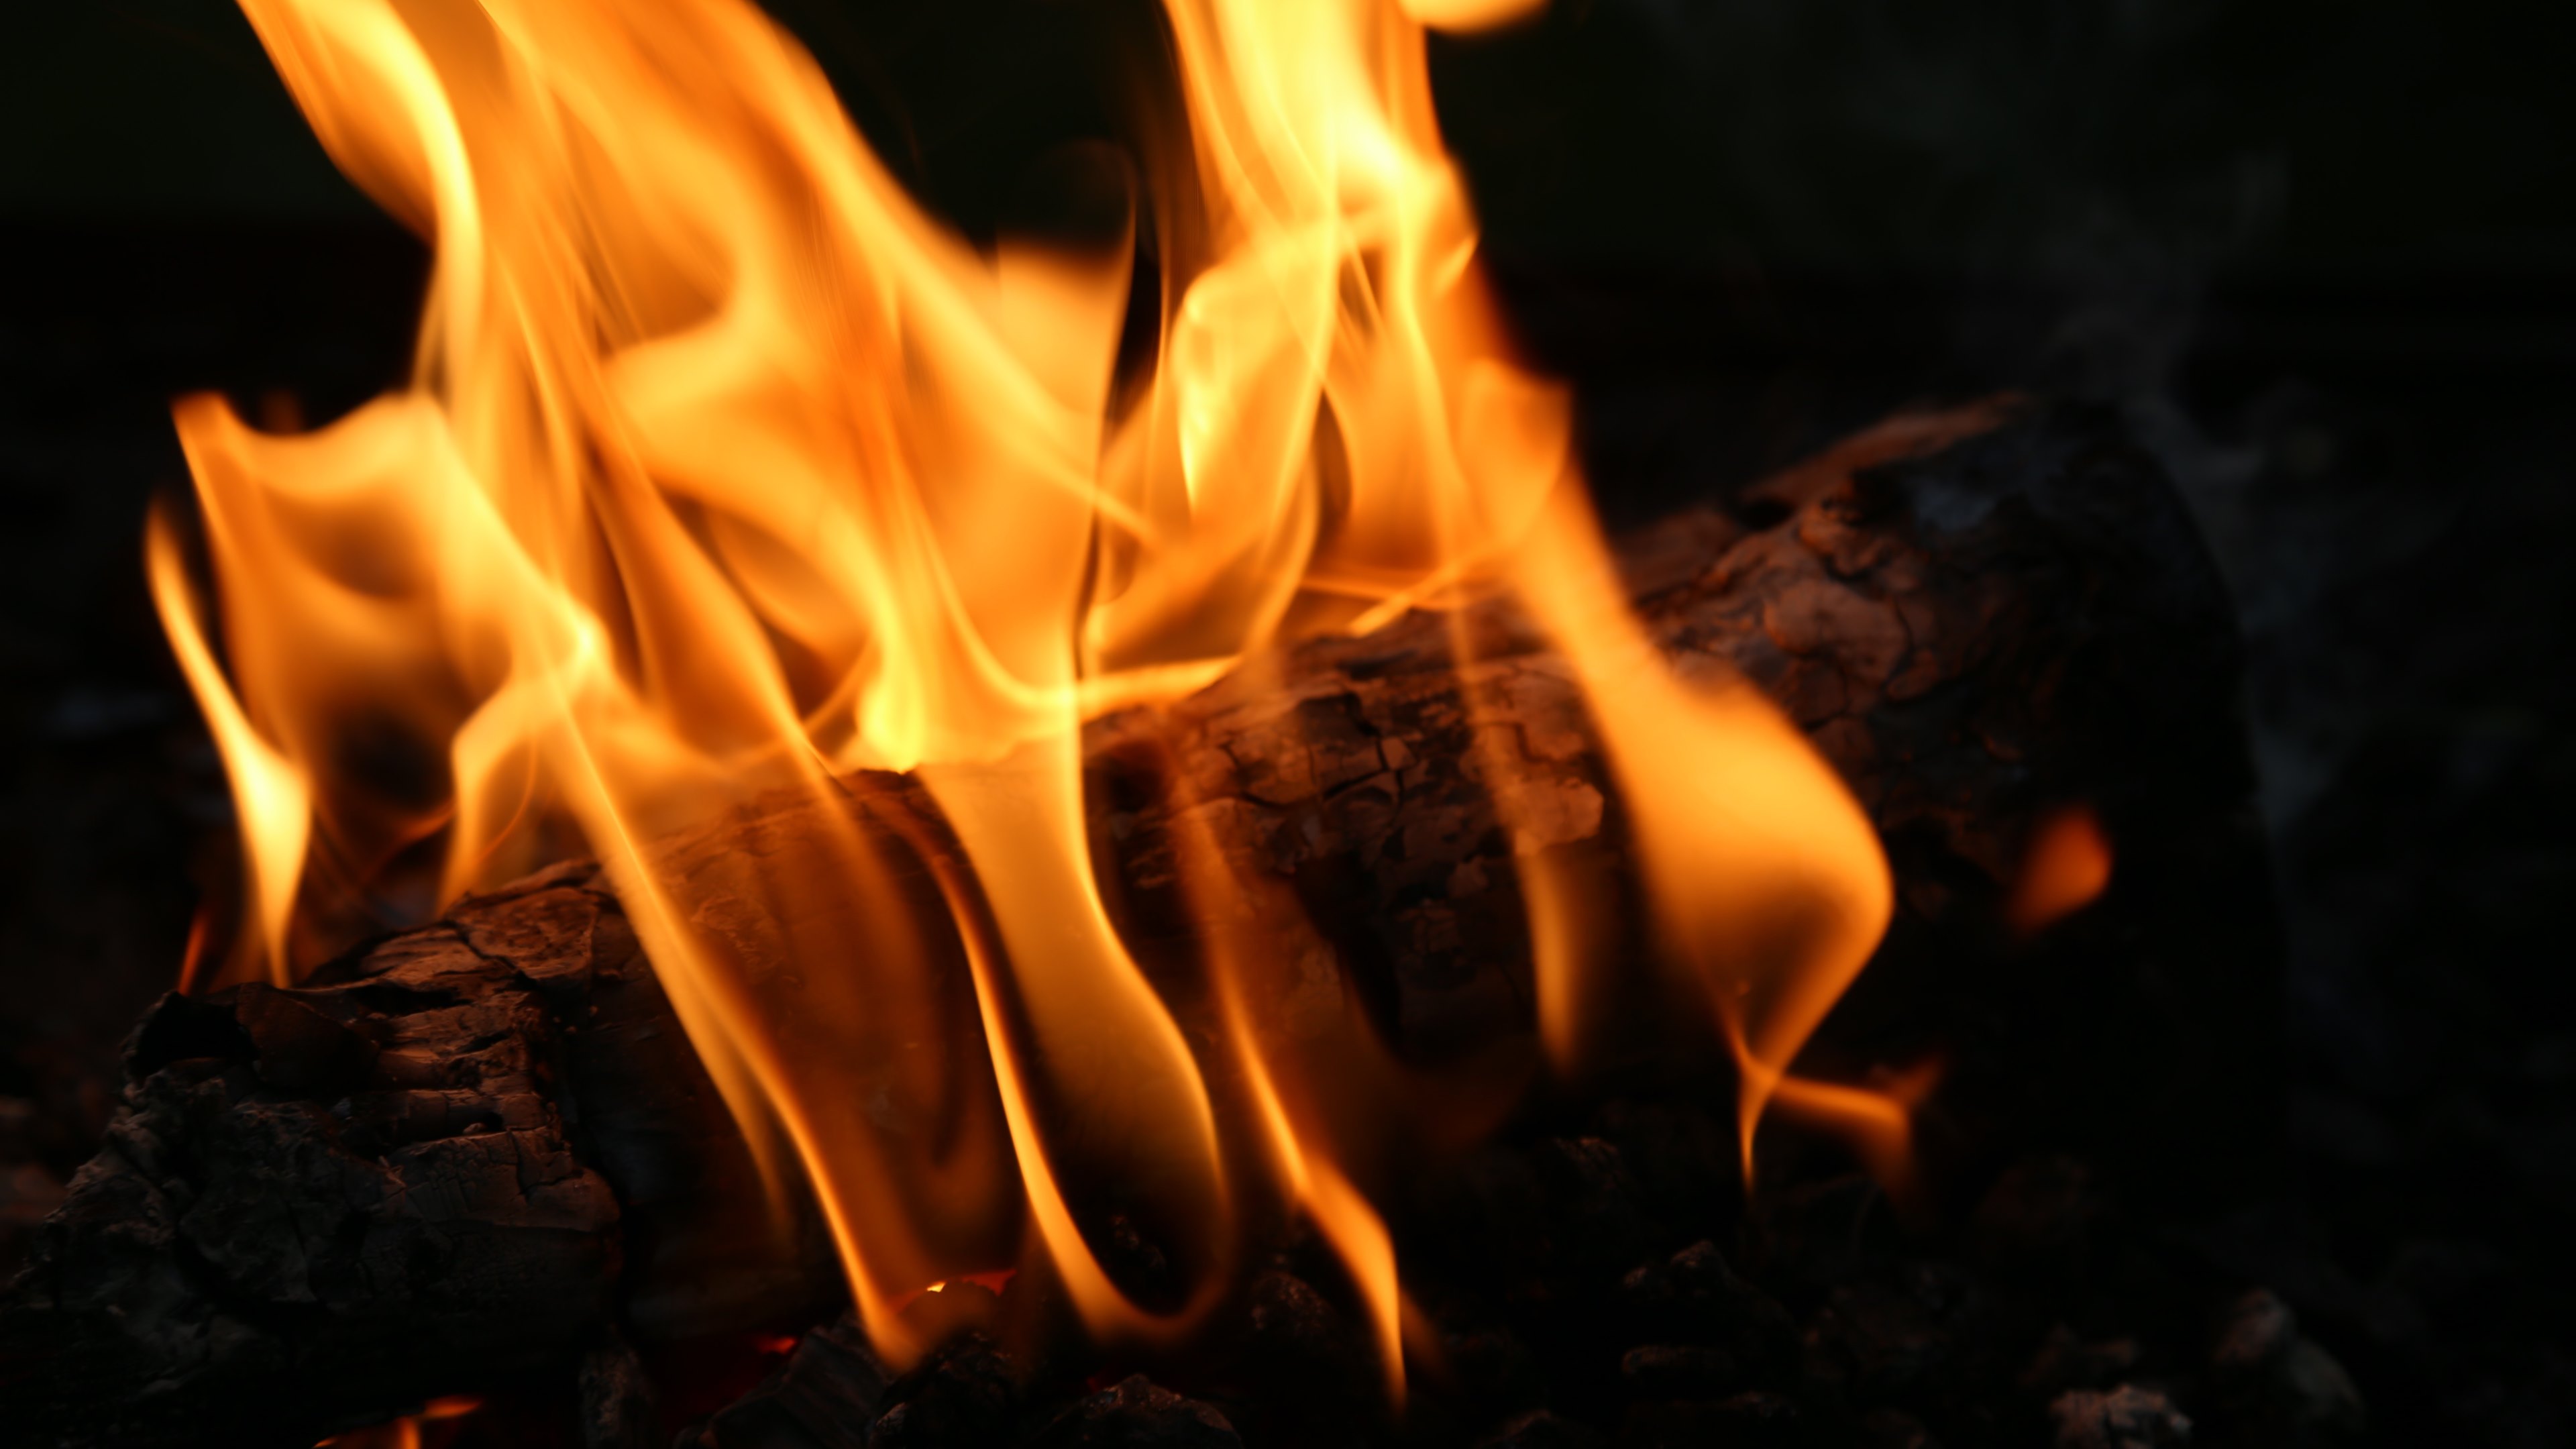 4K Fire Wallpapers High Quality | Download Free